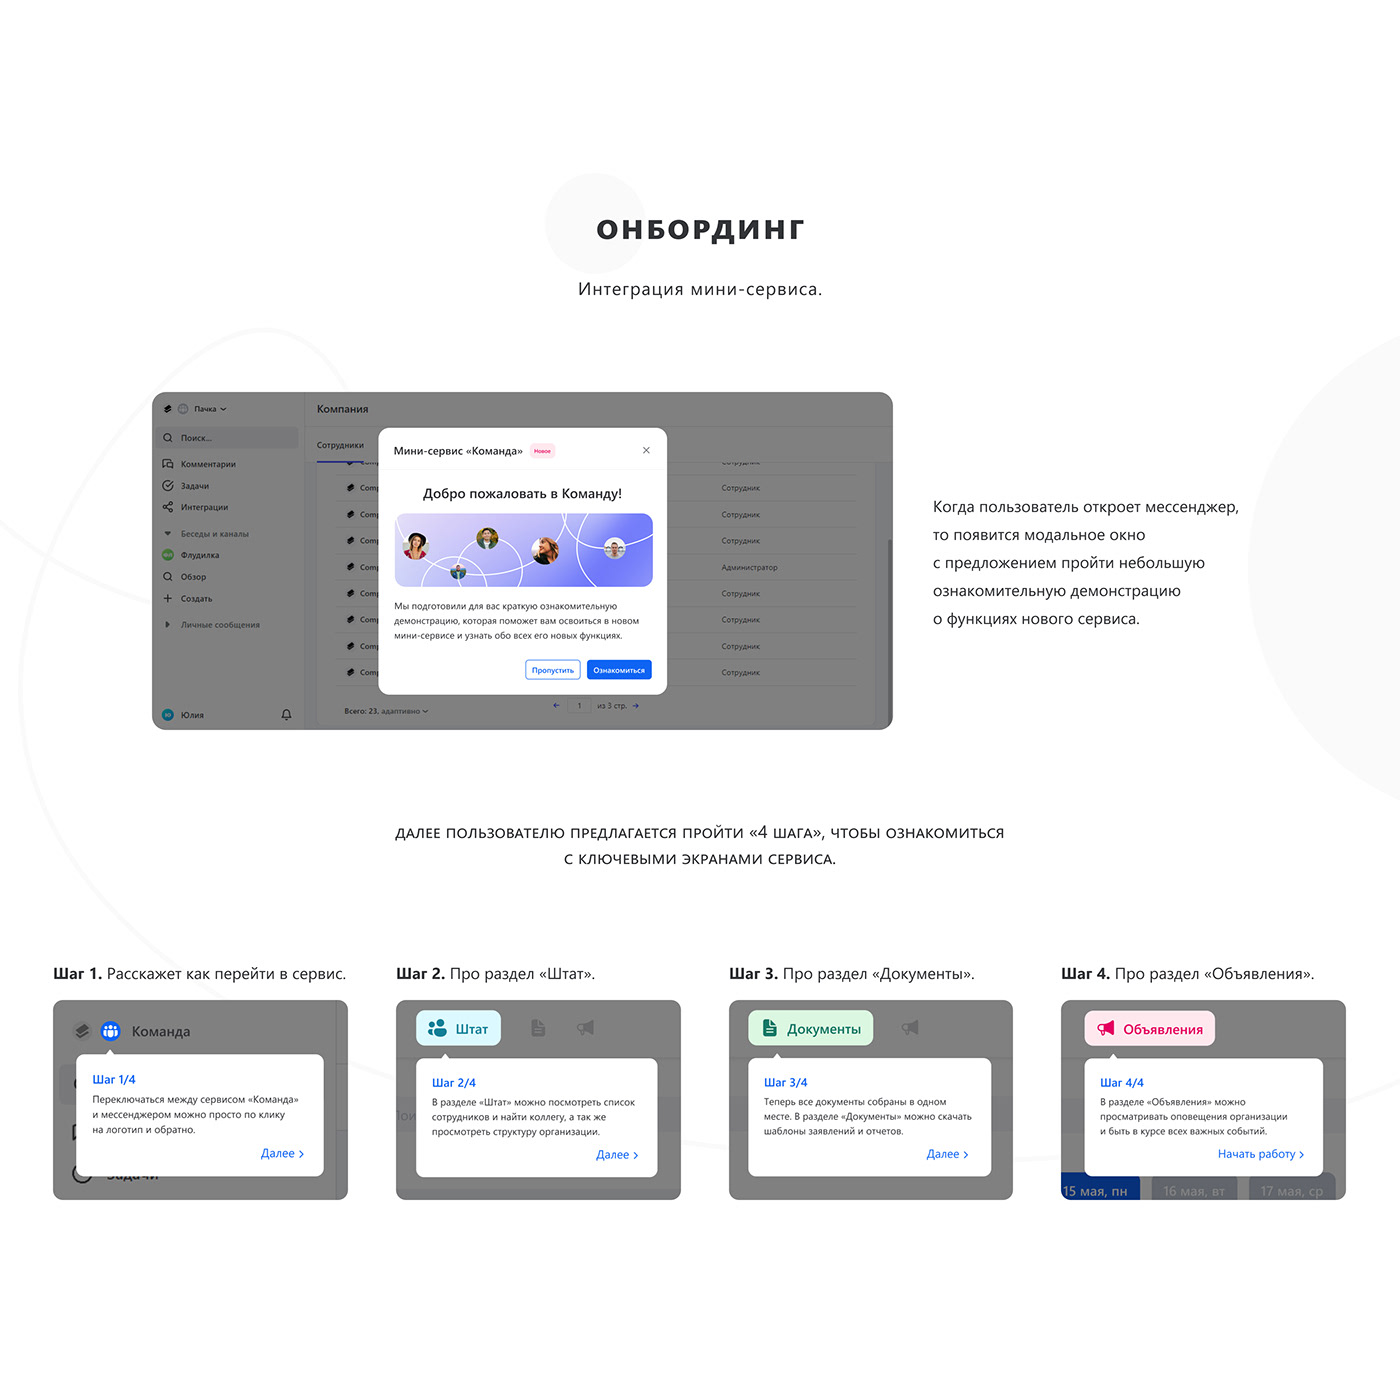 messenger Chat UI/UX social network web app corporate ux ui design user interface Experience